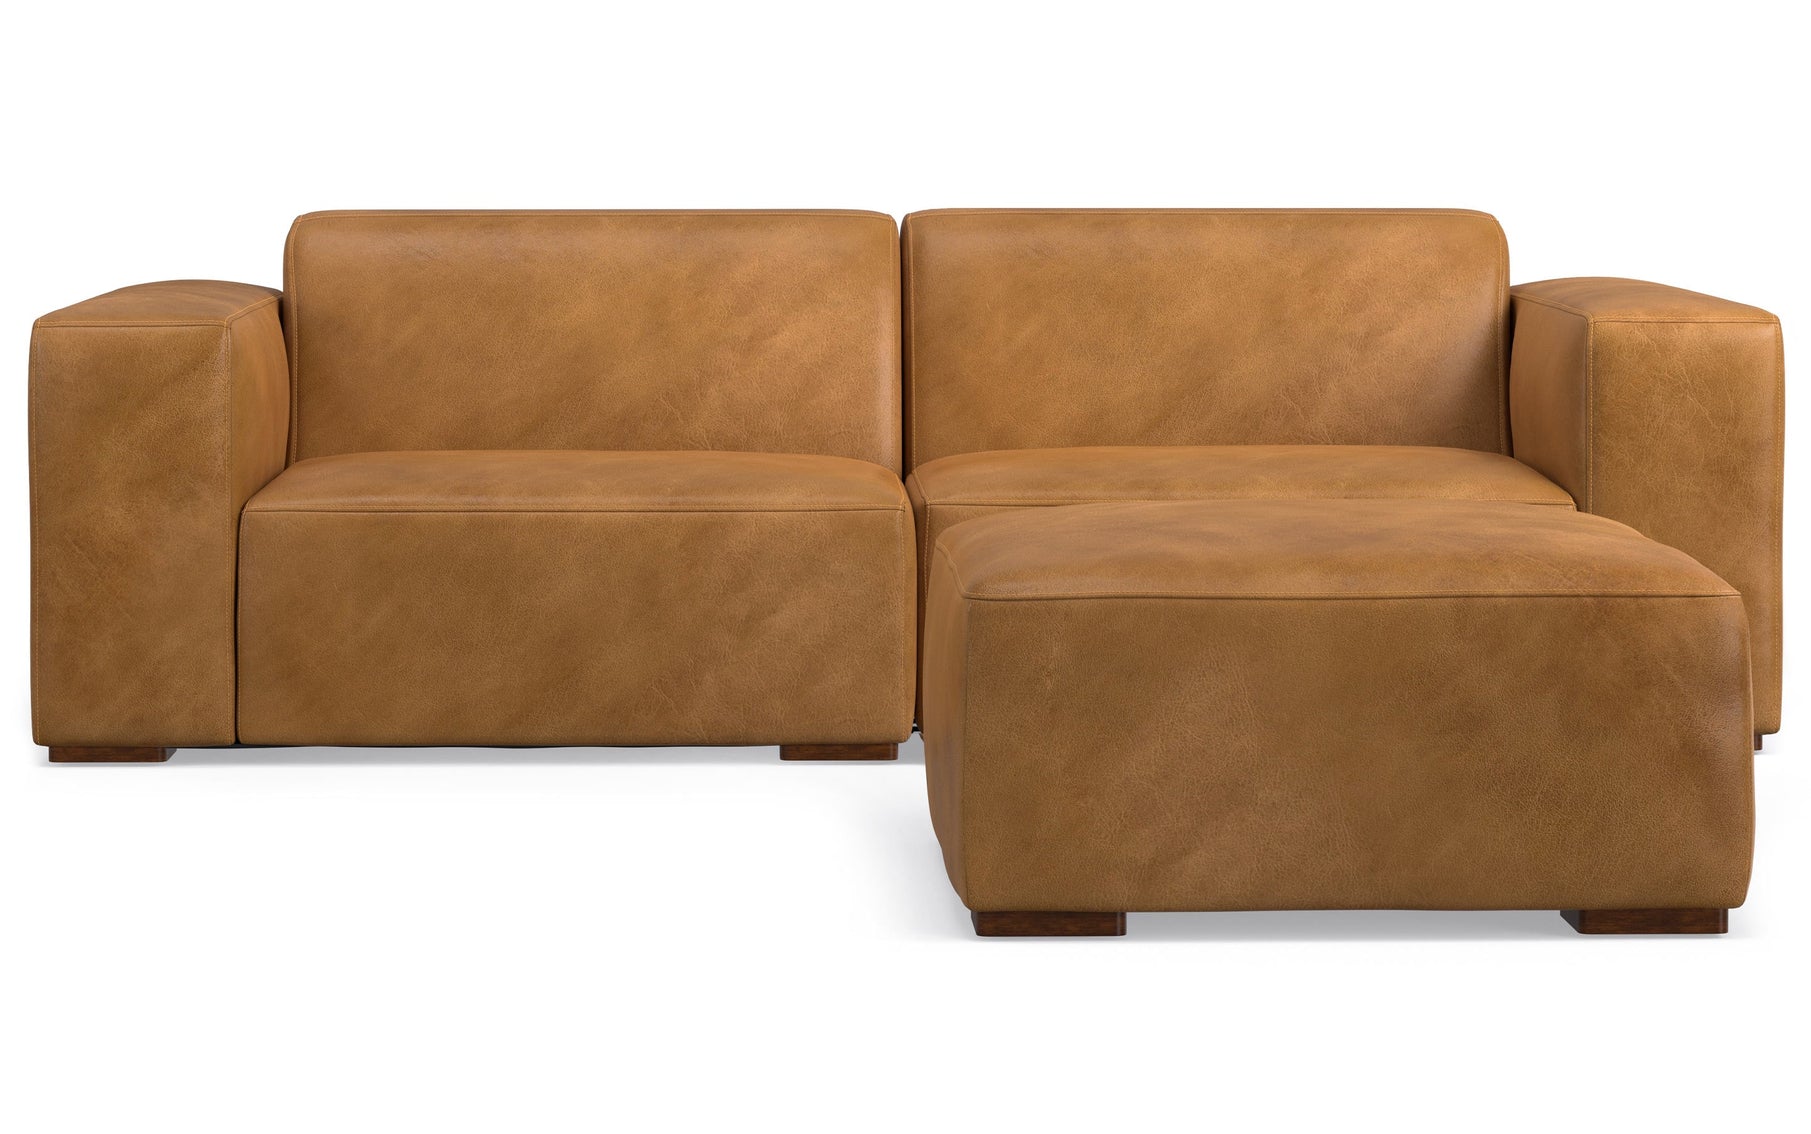 Sienna Genuine Leather | Rex 2 Seater Sofa and Ottoman in Genuine Leather